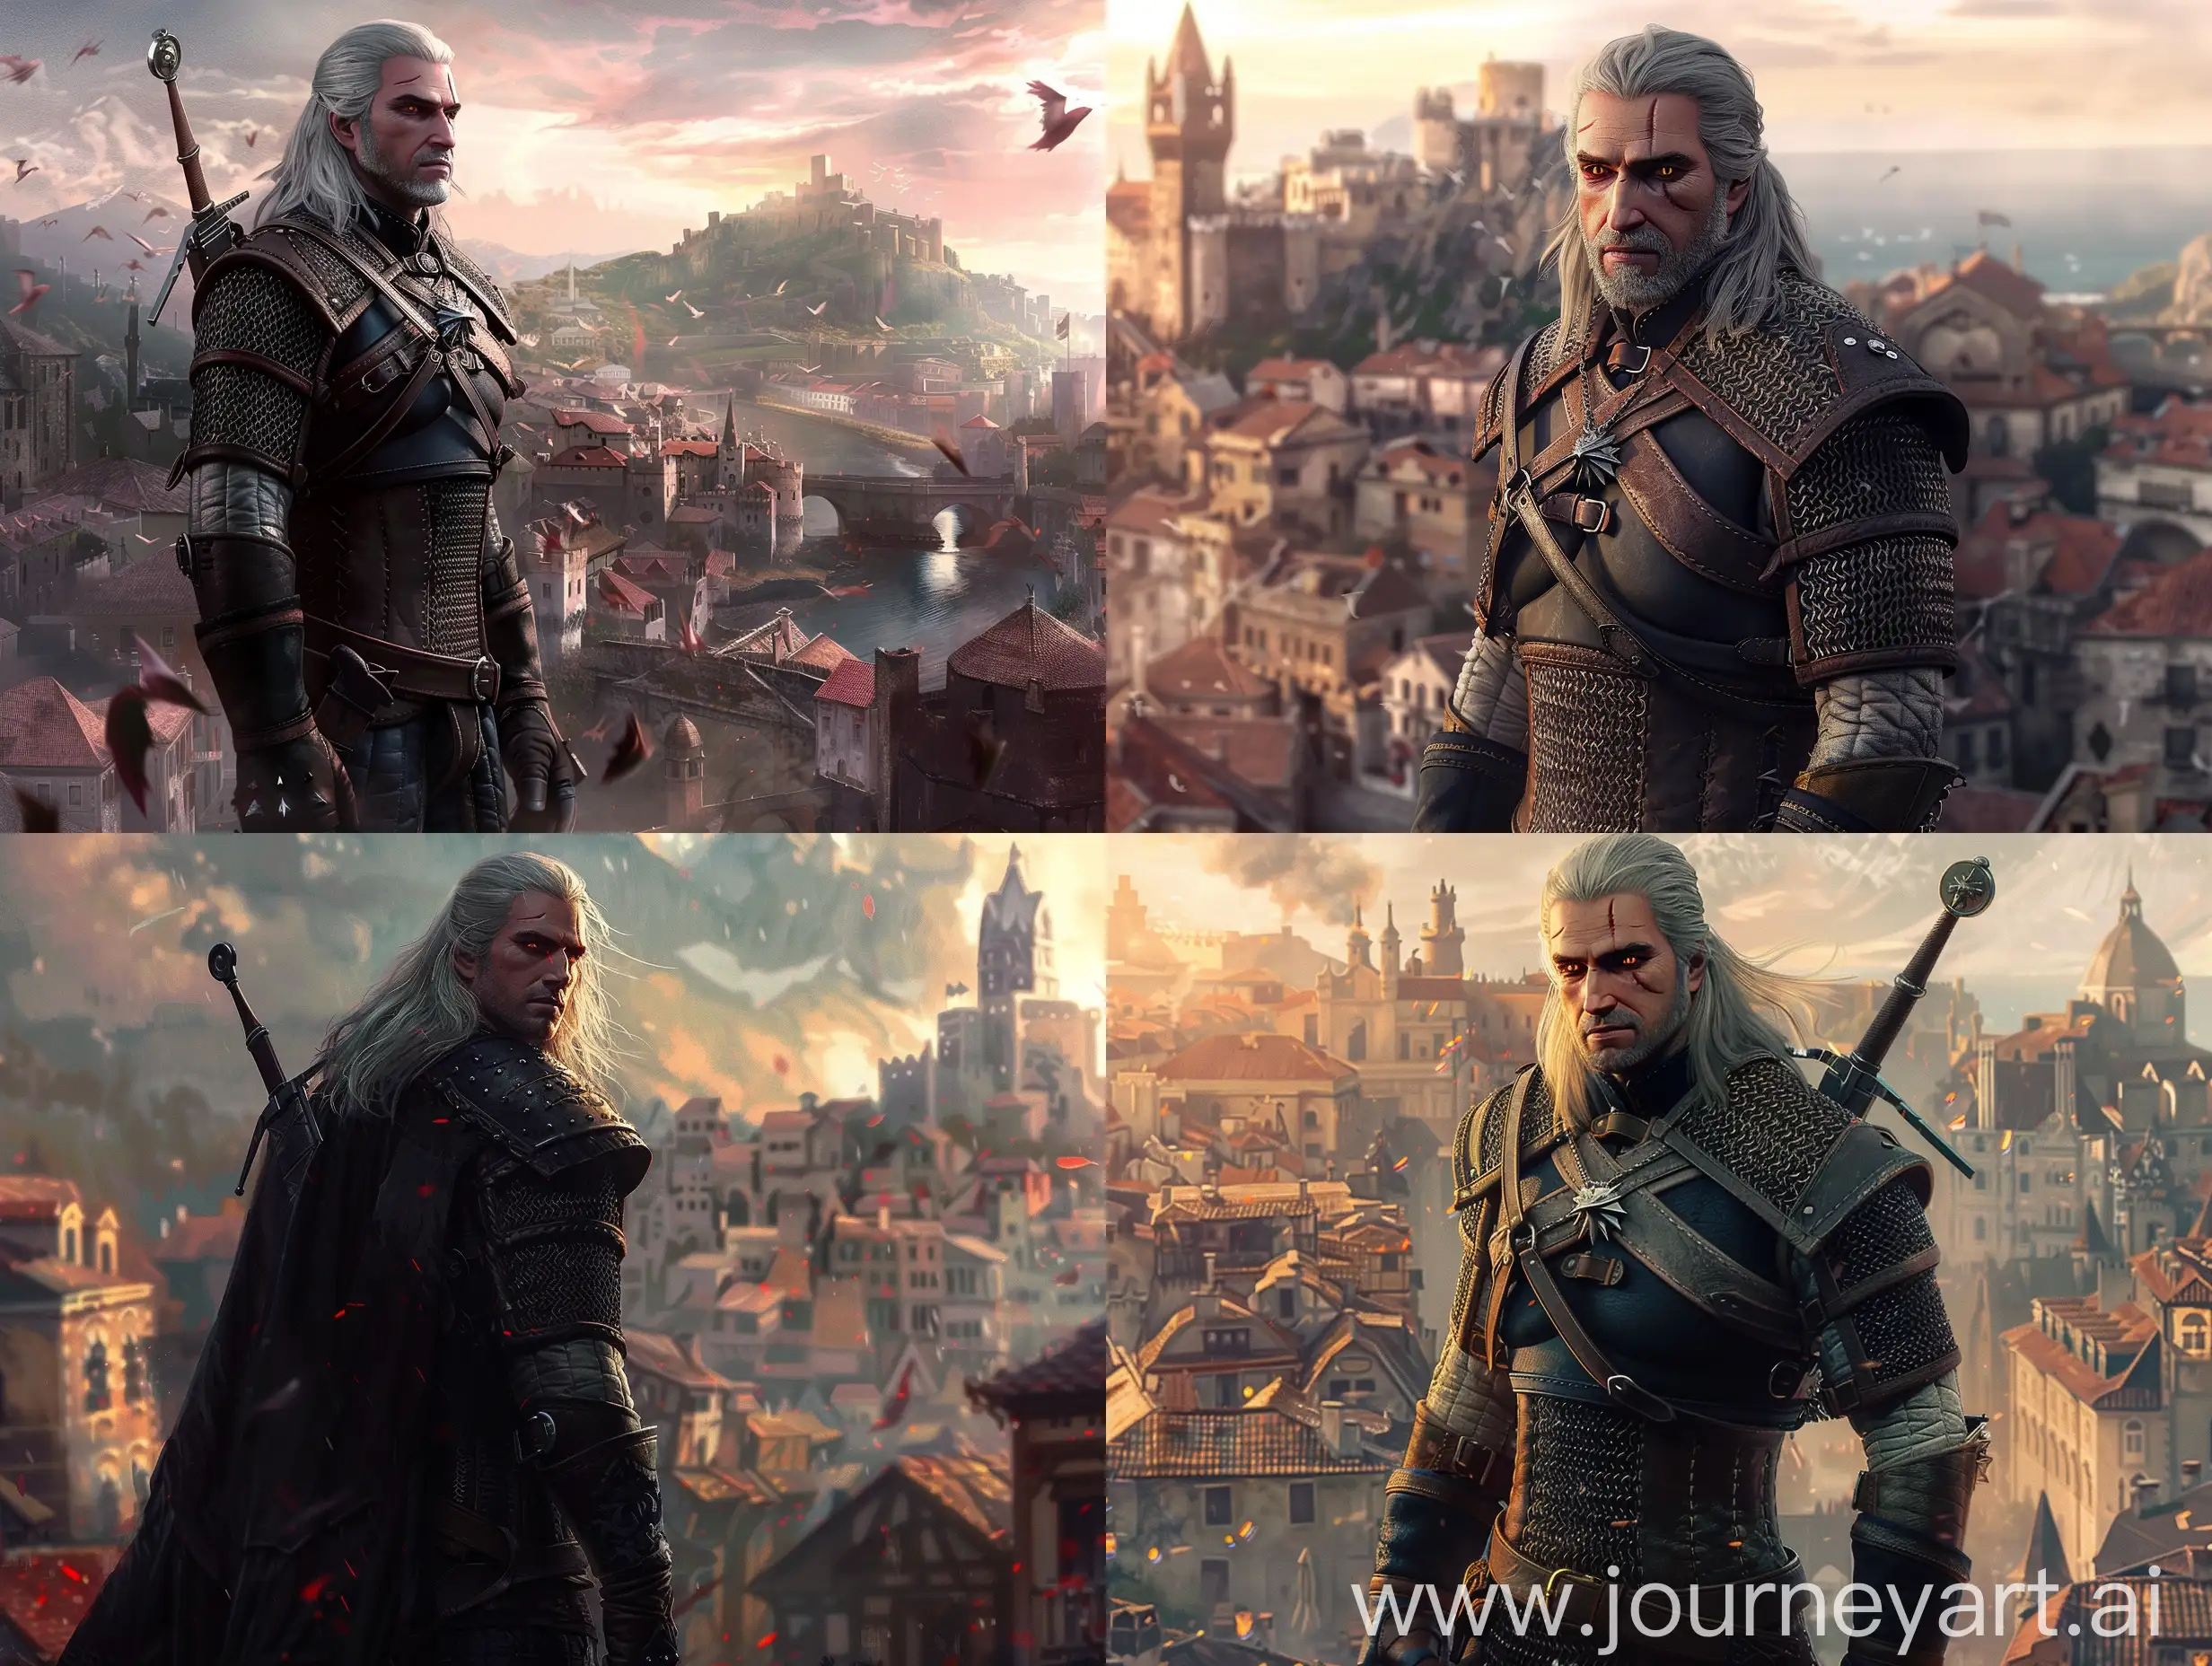 The Witcher Geralt in the style of the game, the image is in the style of the game, 4K quality, super realistic, everything is detailed, the background of the city is beautiful, he stands tall,  